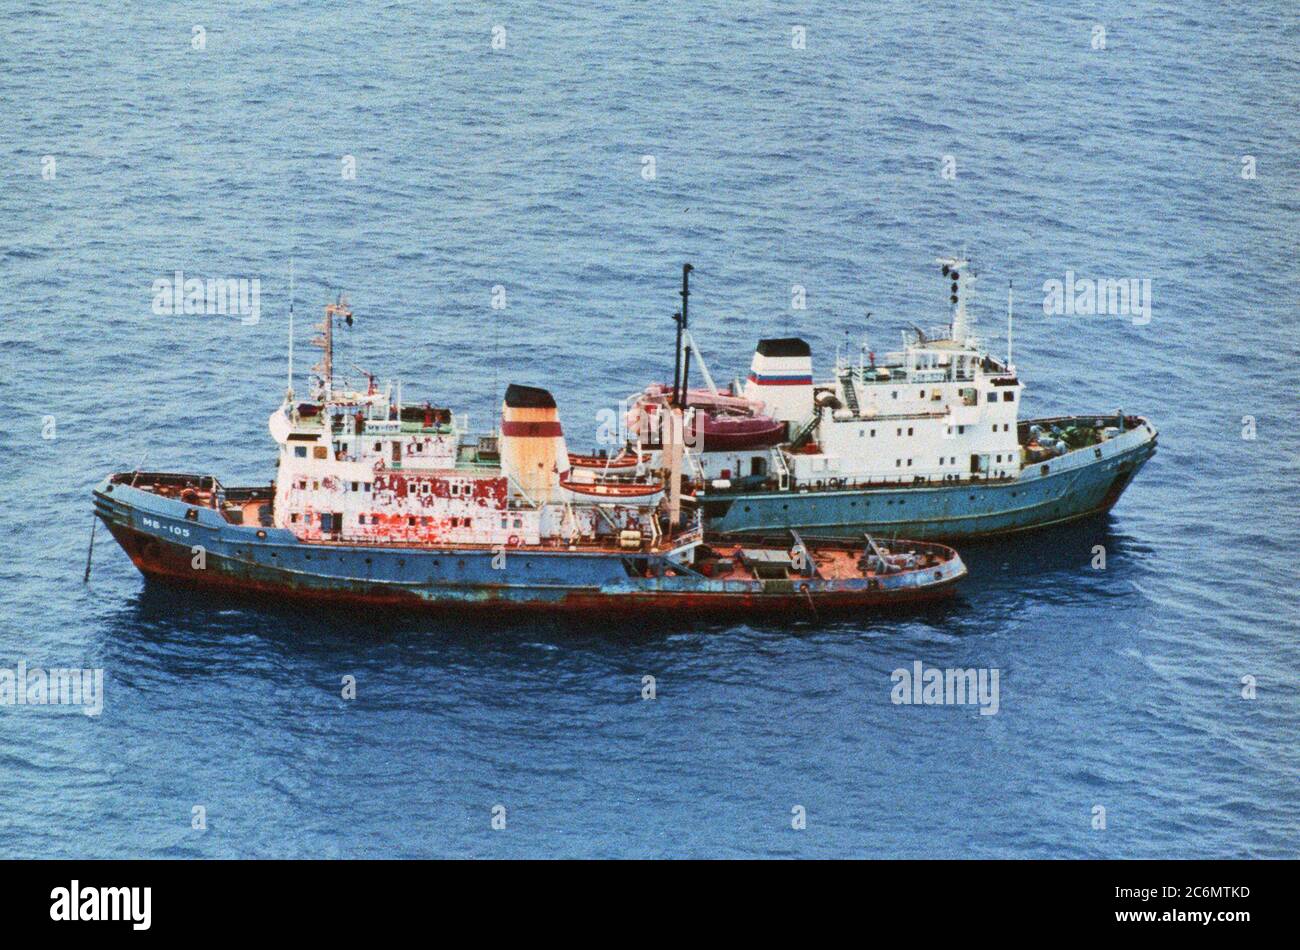 Aerial port side view of the Russian Navy Pacific Fleet Goryn class rescue tug SB-522 operating along side her sister ship ocean going tug MB-105. Stock Photo